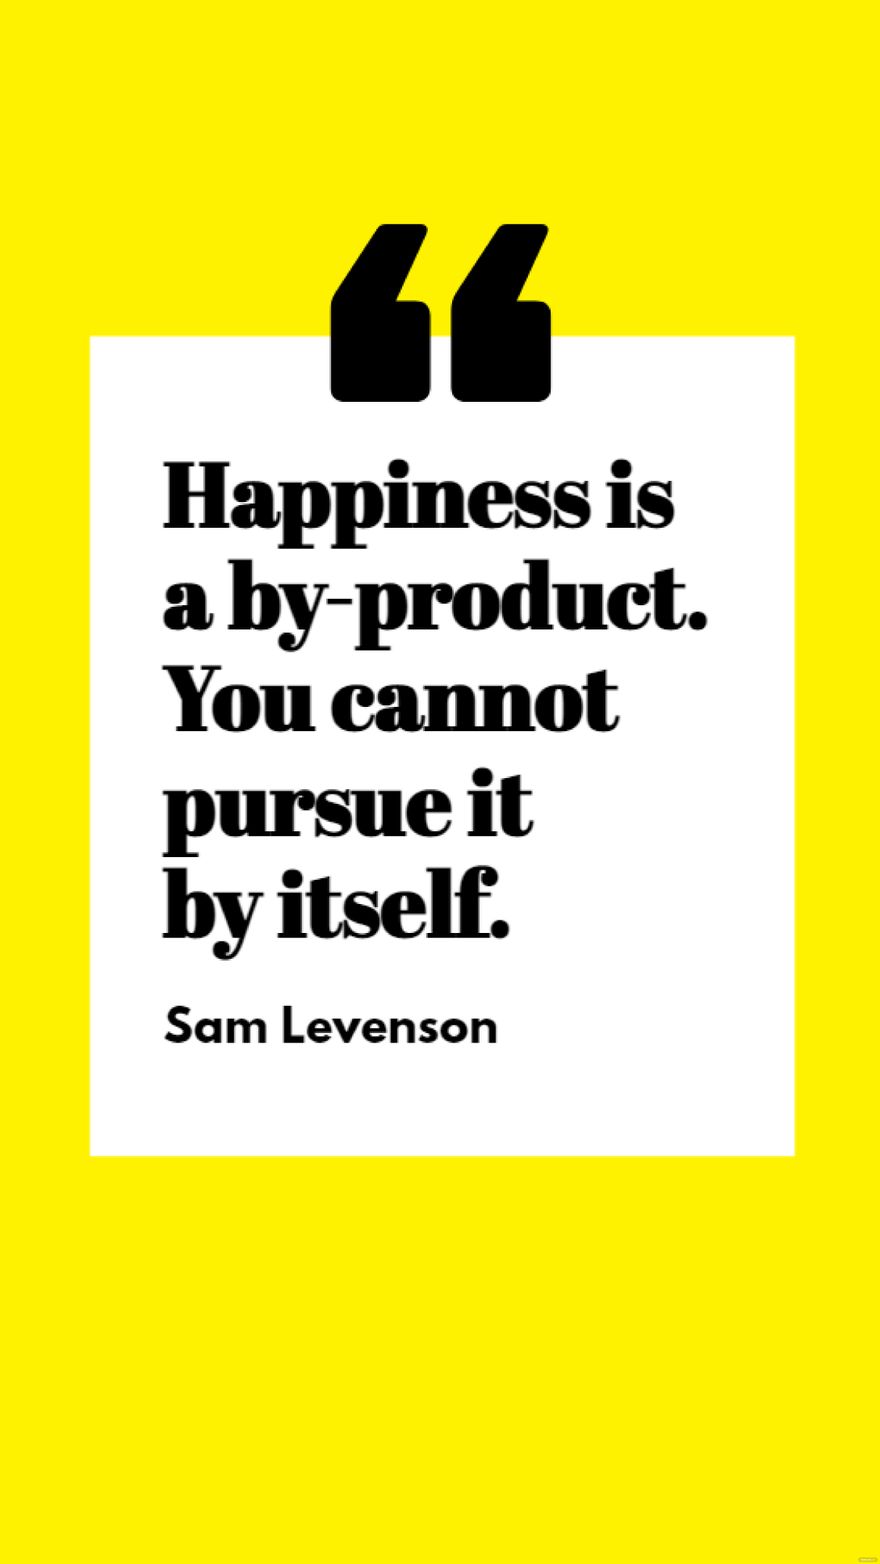 Free Sam Levenson - Happiness is a by-product. You cannot pursue it by itself. in JPG